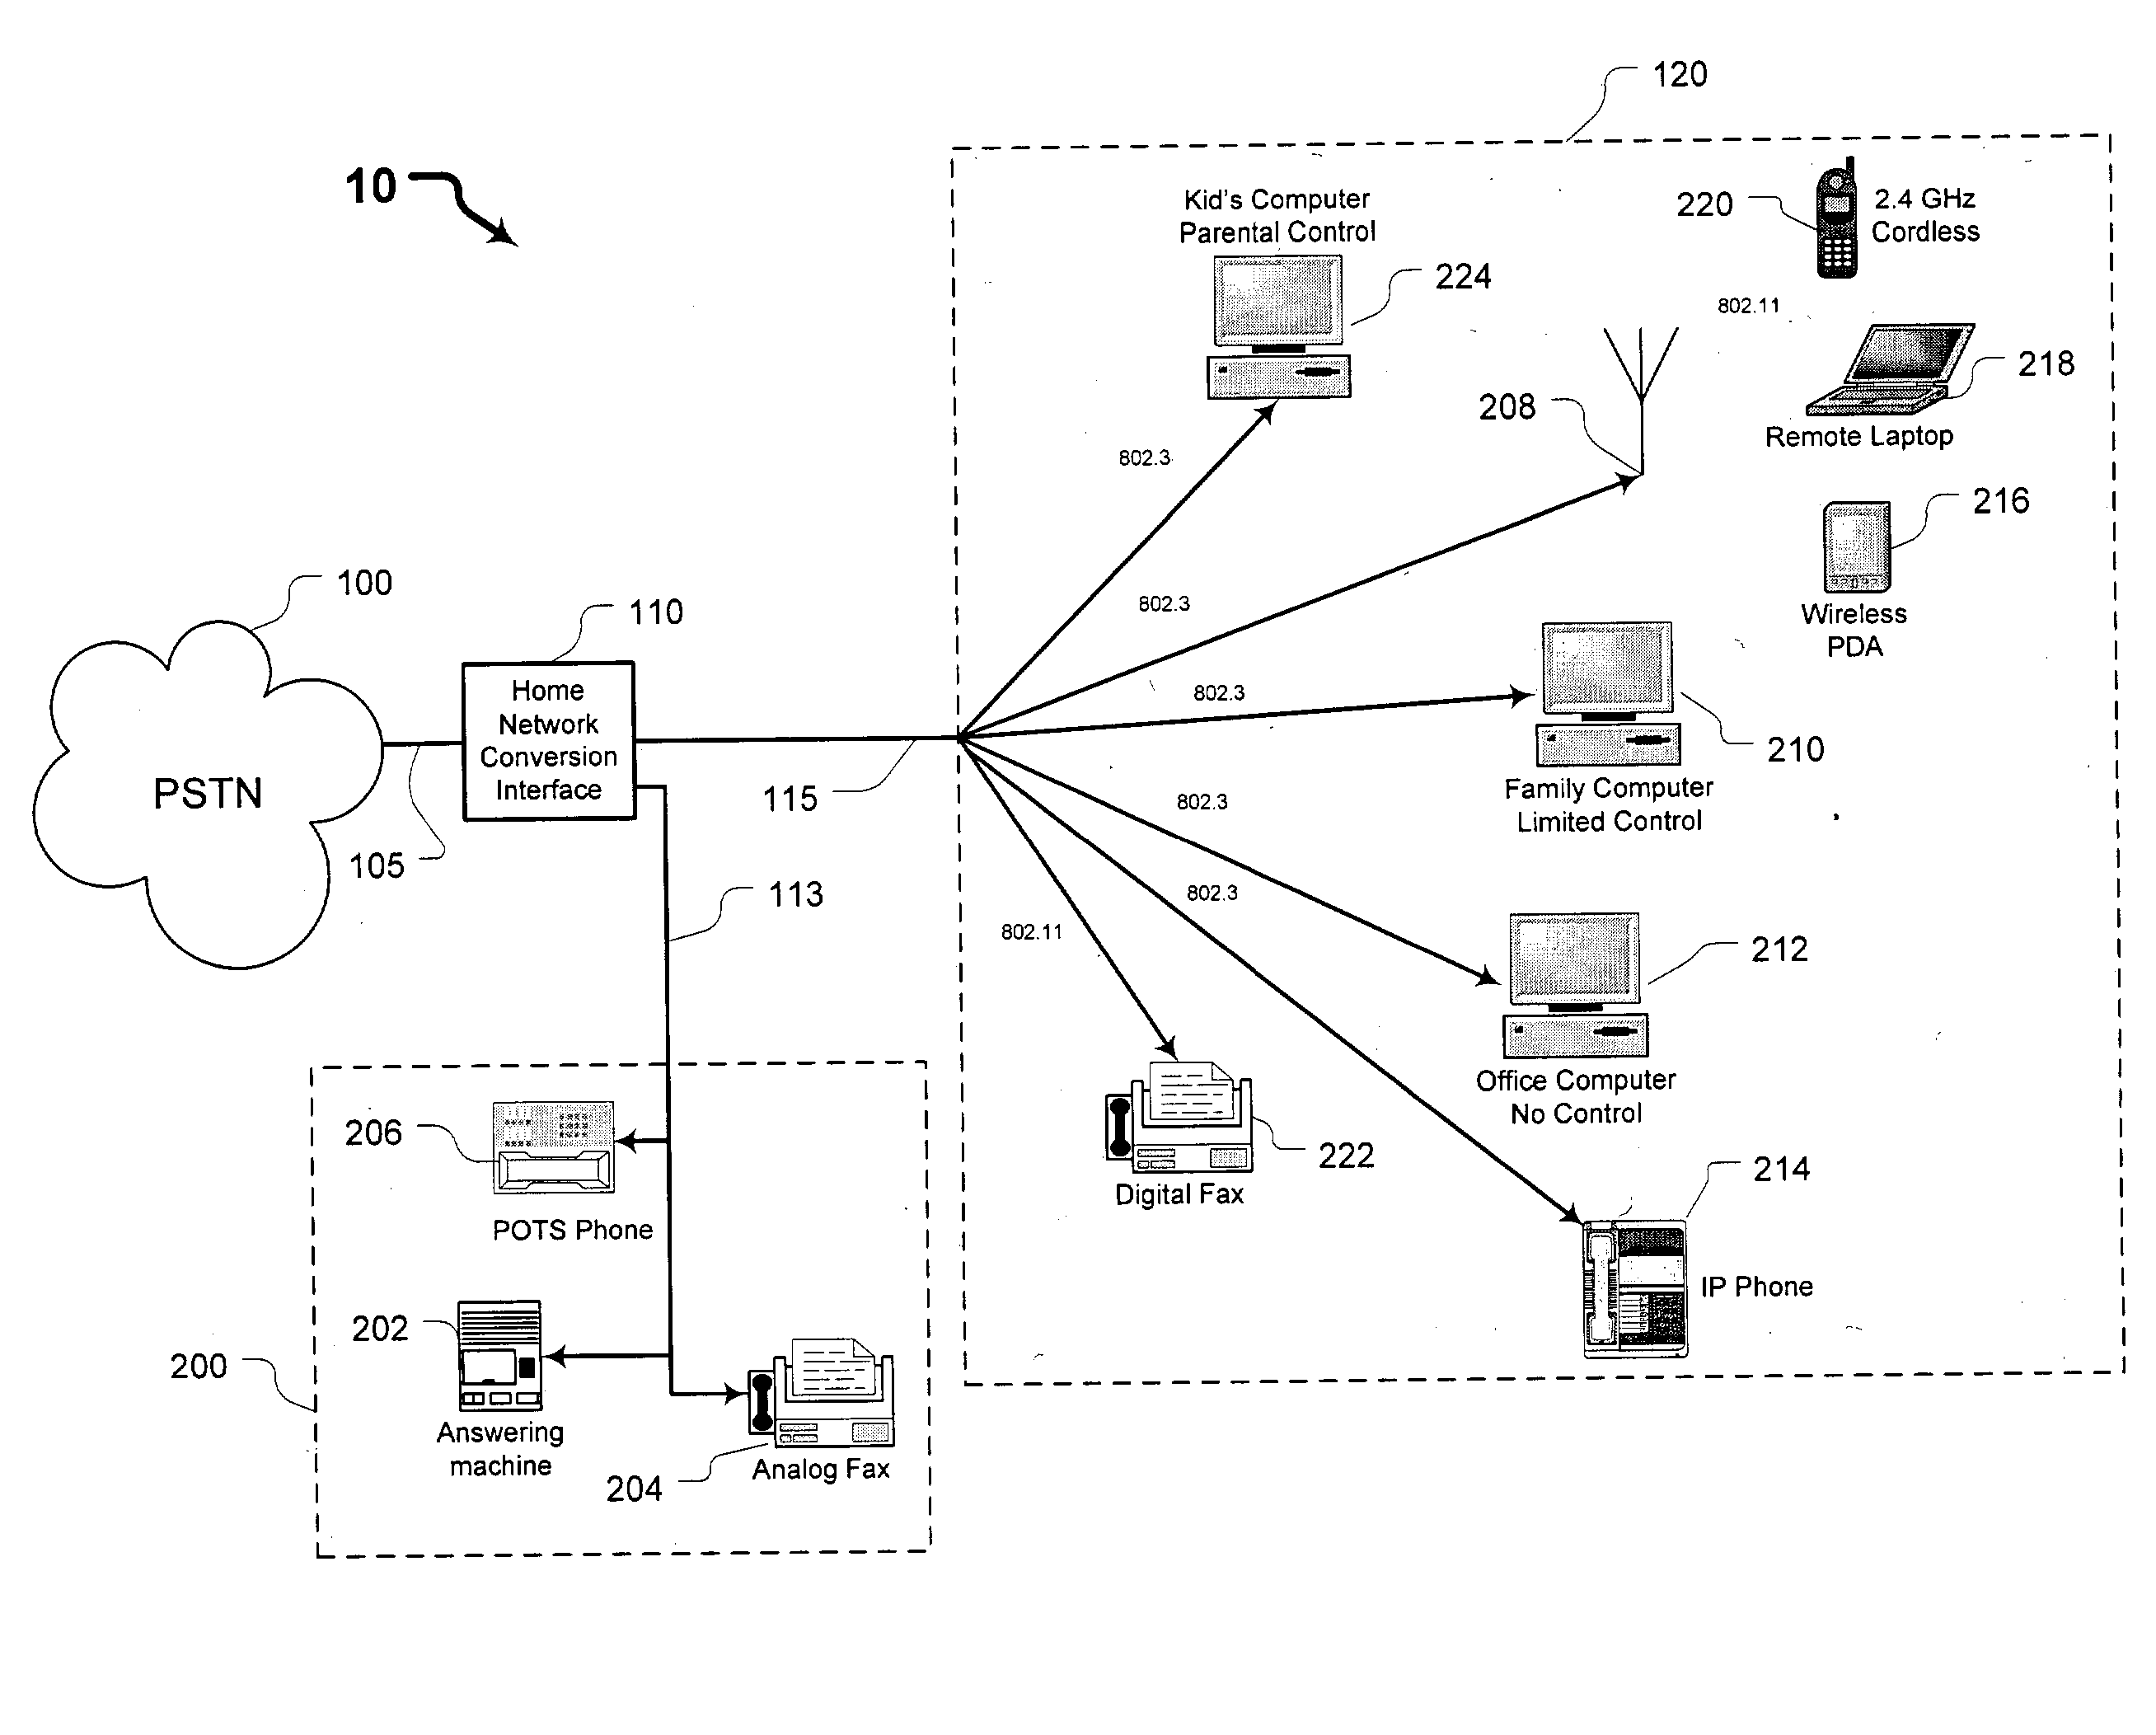 Systems and methods for providing a home network conversion interface